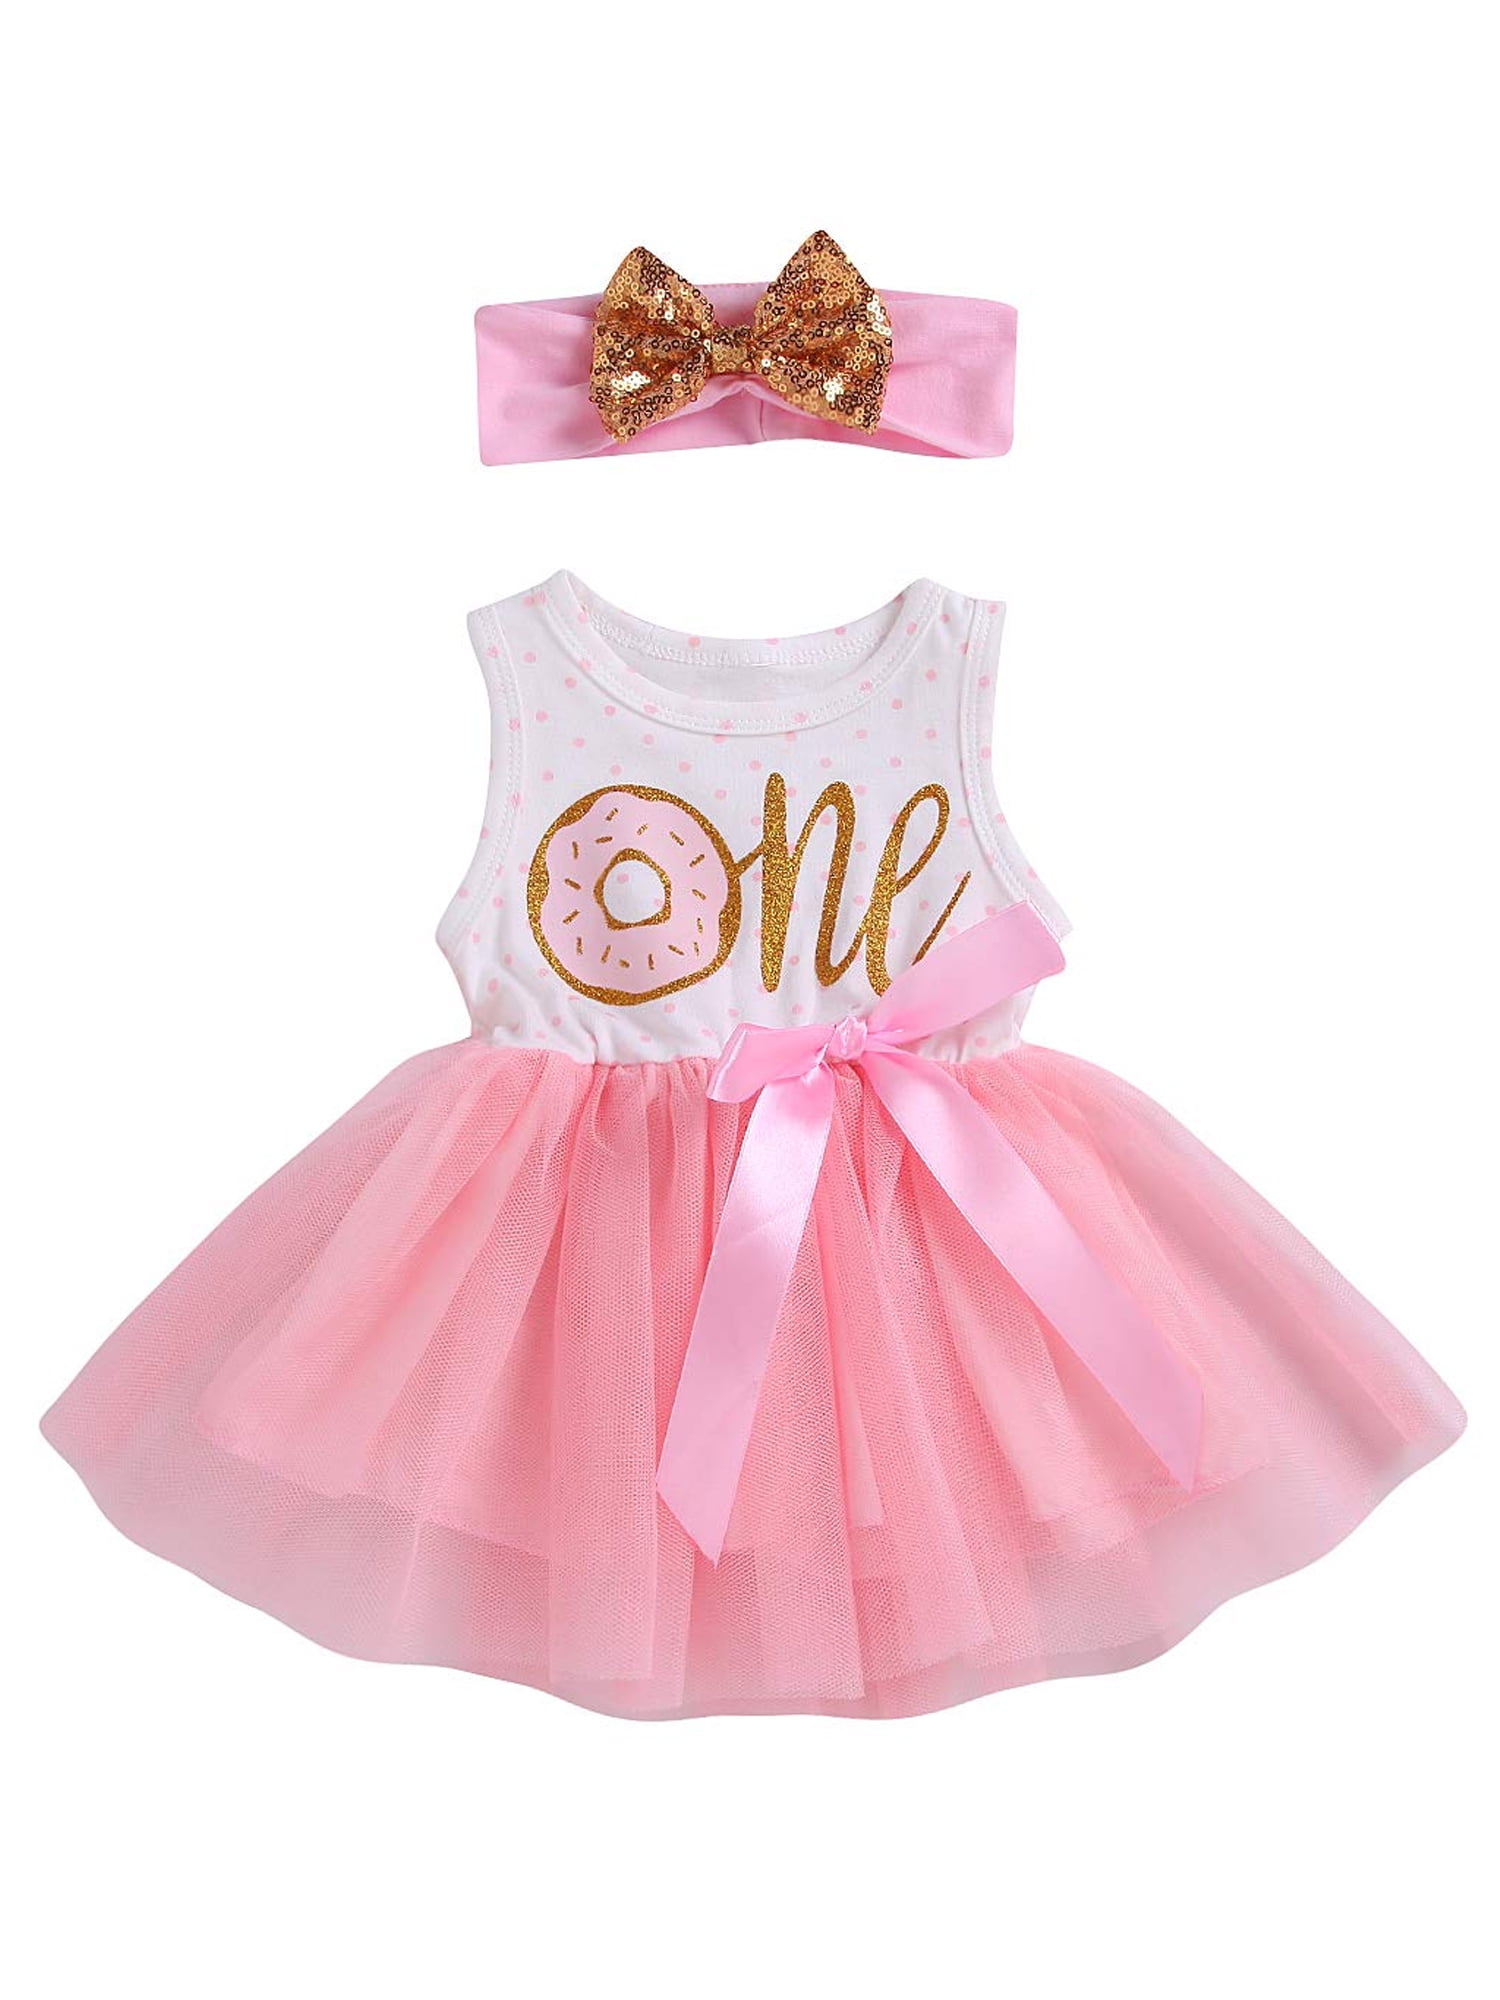 Infant Toddler Baby Girl Outfits 1st Birthday Romper One Top Bow Knot Tutu Skirt 2PCS Summer Clothes 